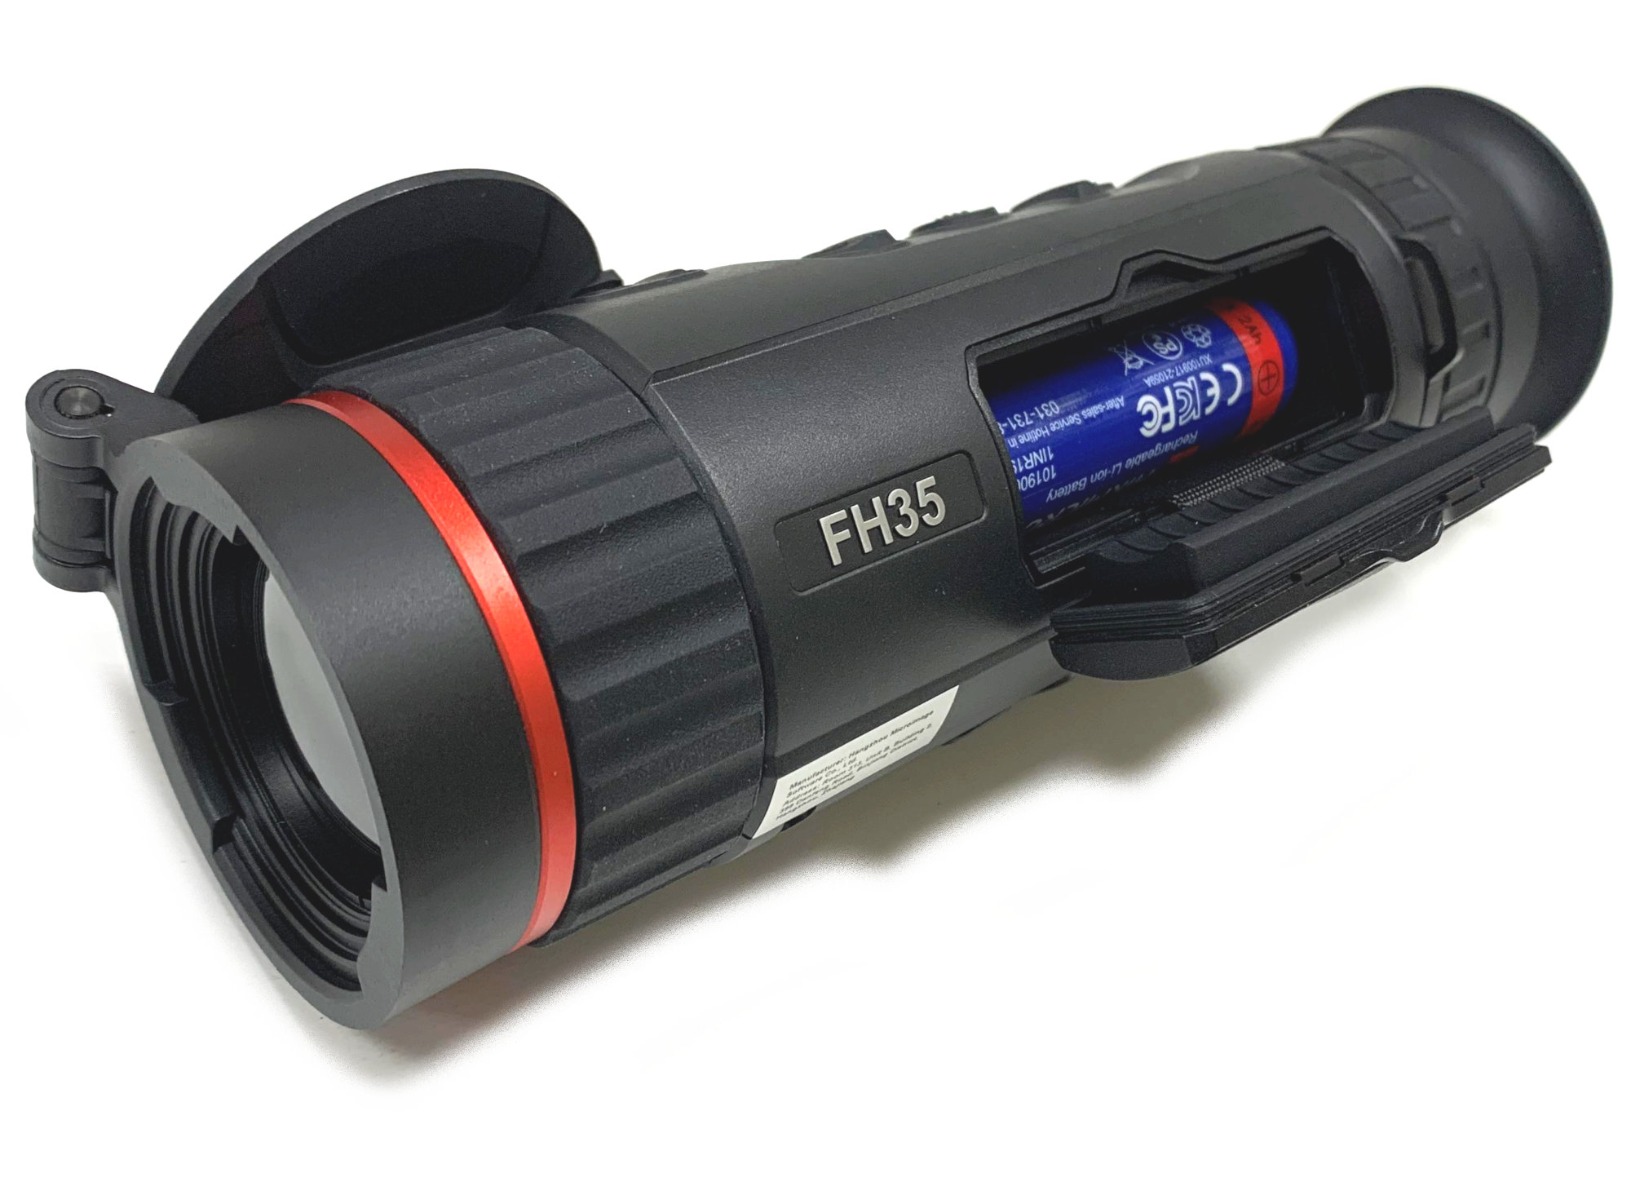 hikmicro falcon fh35 thermal